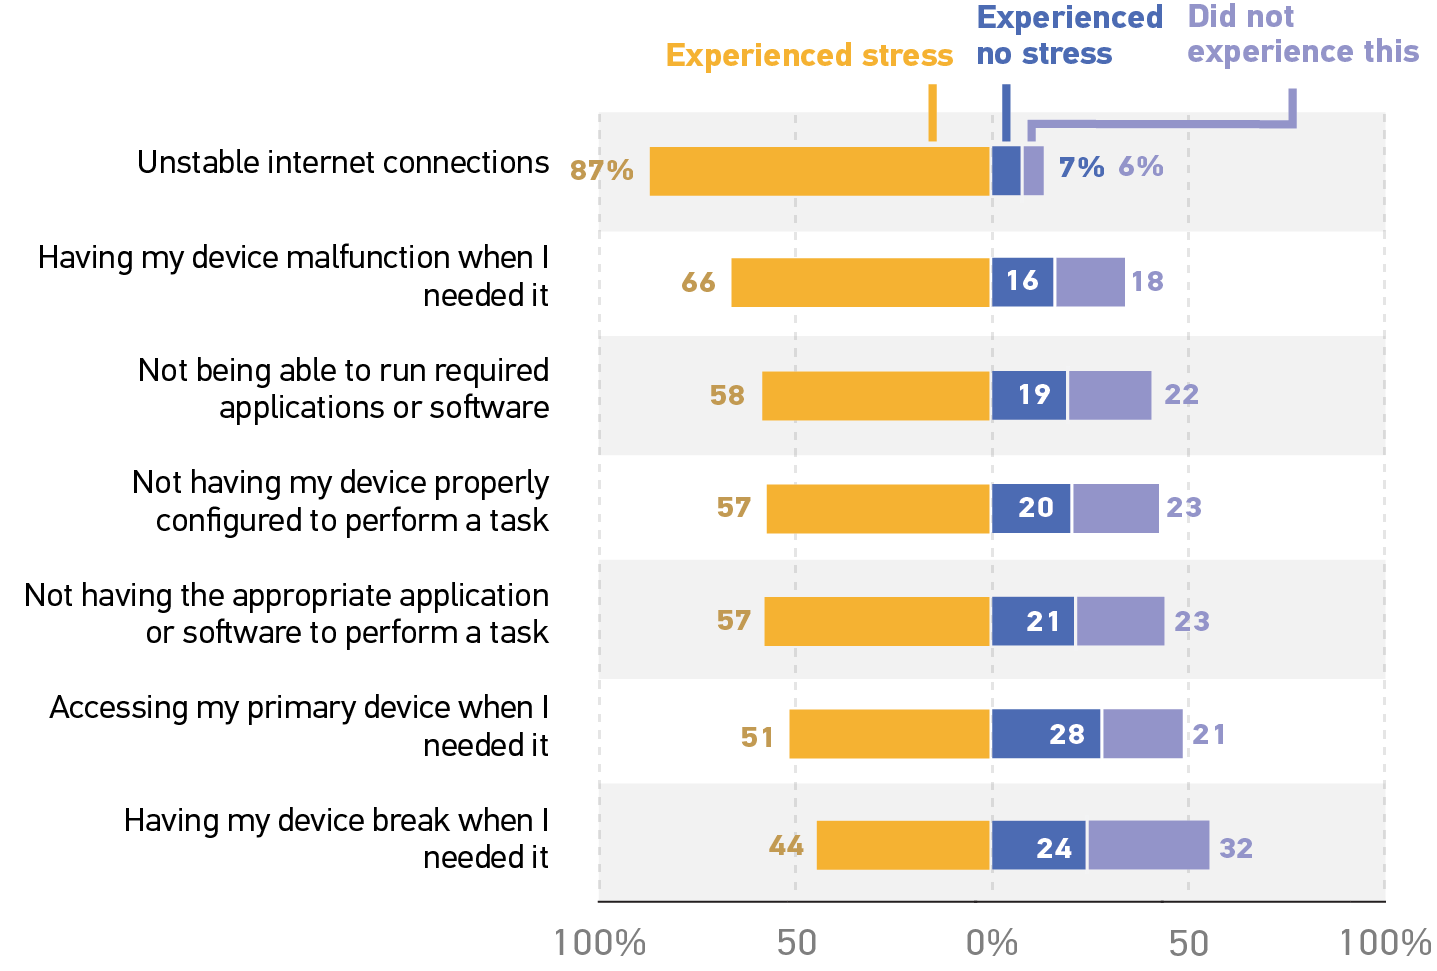 stacked bar graph showing the percentage of respondents who Experienced stress (ES), Experienced no stress (NS), or Did not experience this (NA).
Unstable internet connections ES 87%, NS 7%, NA 6%.
Having my device malfunction when I needed it ES 66%, NS 16%, NA 18%.
Not being able to run required applications or software  ES 58%, NS 19%, NA 22%.
Not having my device properly configured to perform a task ES 57%, NS 20%, NA 23%.
Not having the appropriate application or software to perform a task ES 57%, NS 21%, NA 23%.
Accessing my primary device when I needed it ES 51%, NS 28%, NA 21%.
Having my device break when I needed it ES 44%, NS 24%, NA 32%. 